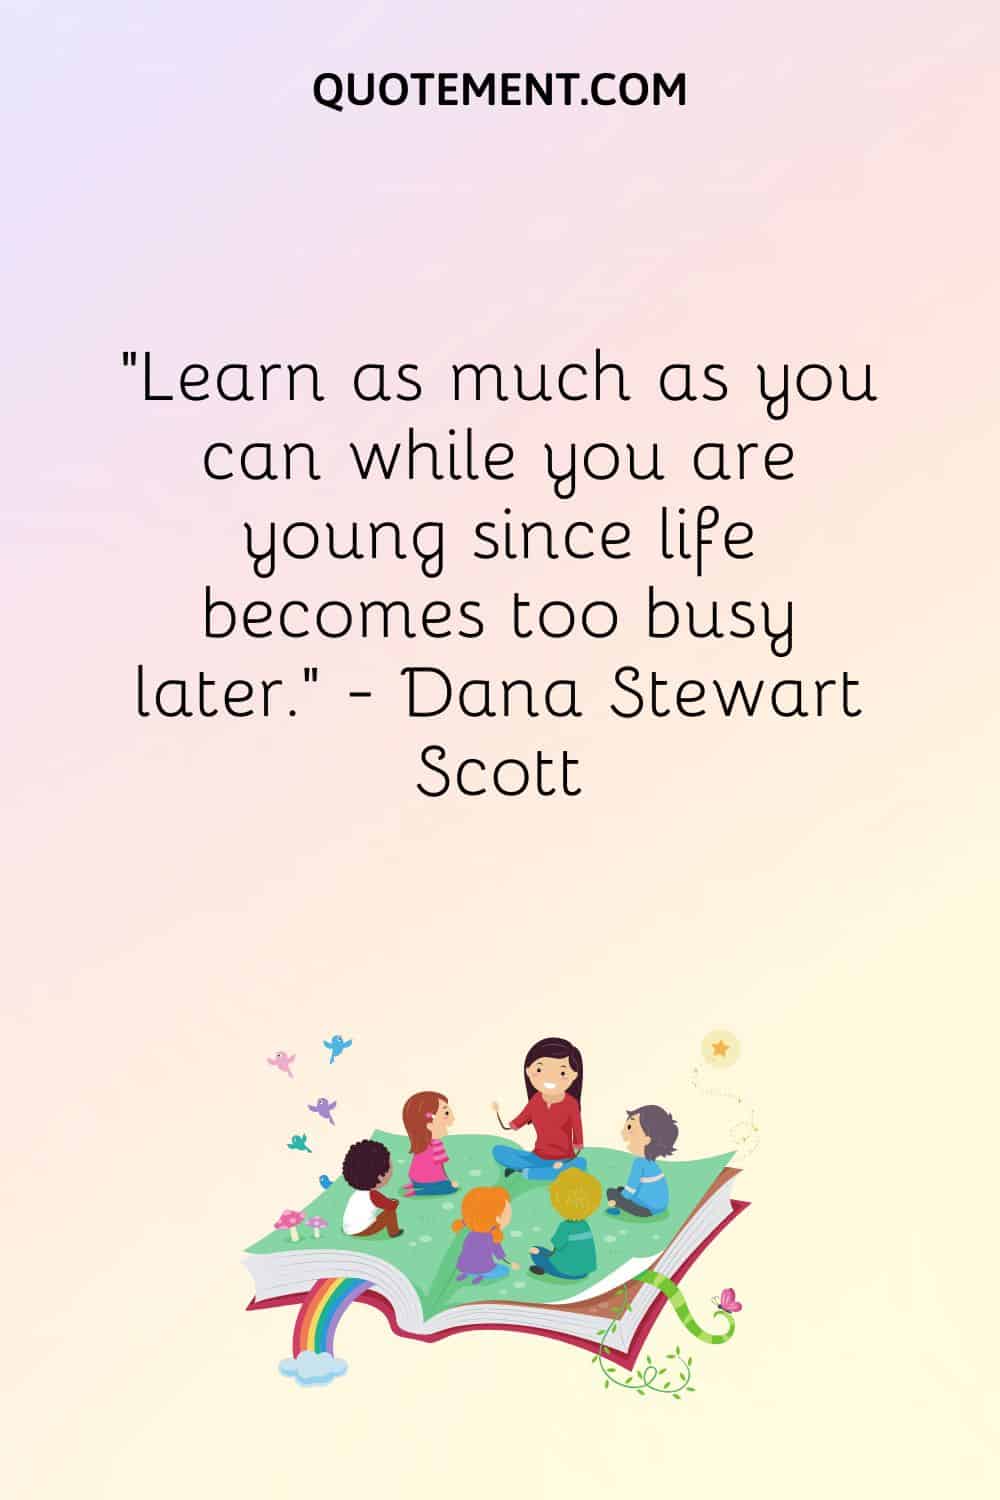 Learn as much as you can while you are young since life becomes too busy later